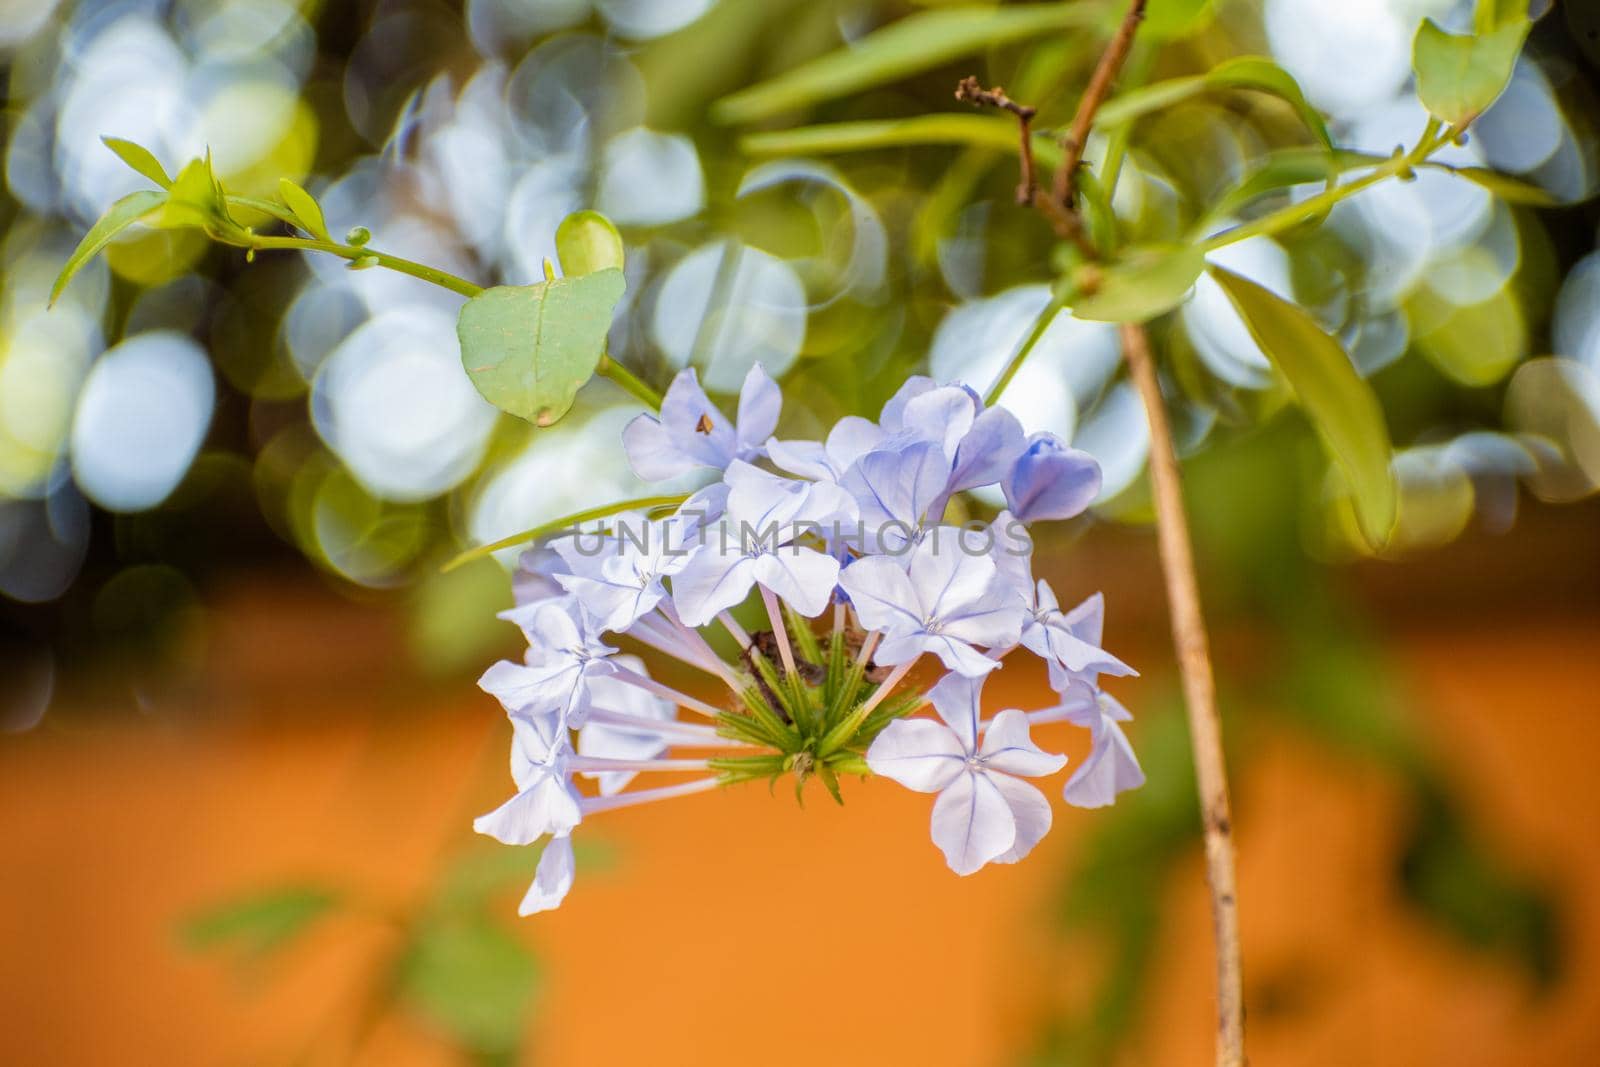 Close-up of beautiful jasmine flowers with blurry background. Bunch of lovely flowers with light blue petals and green leaves. Colorful nature